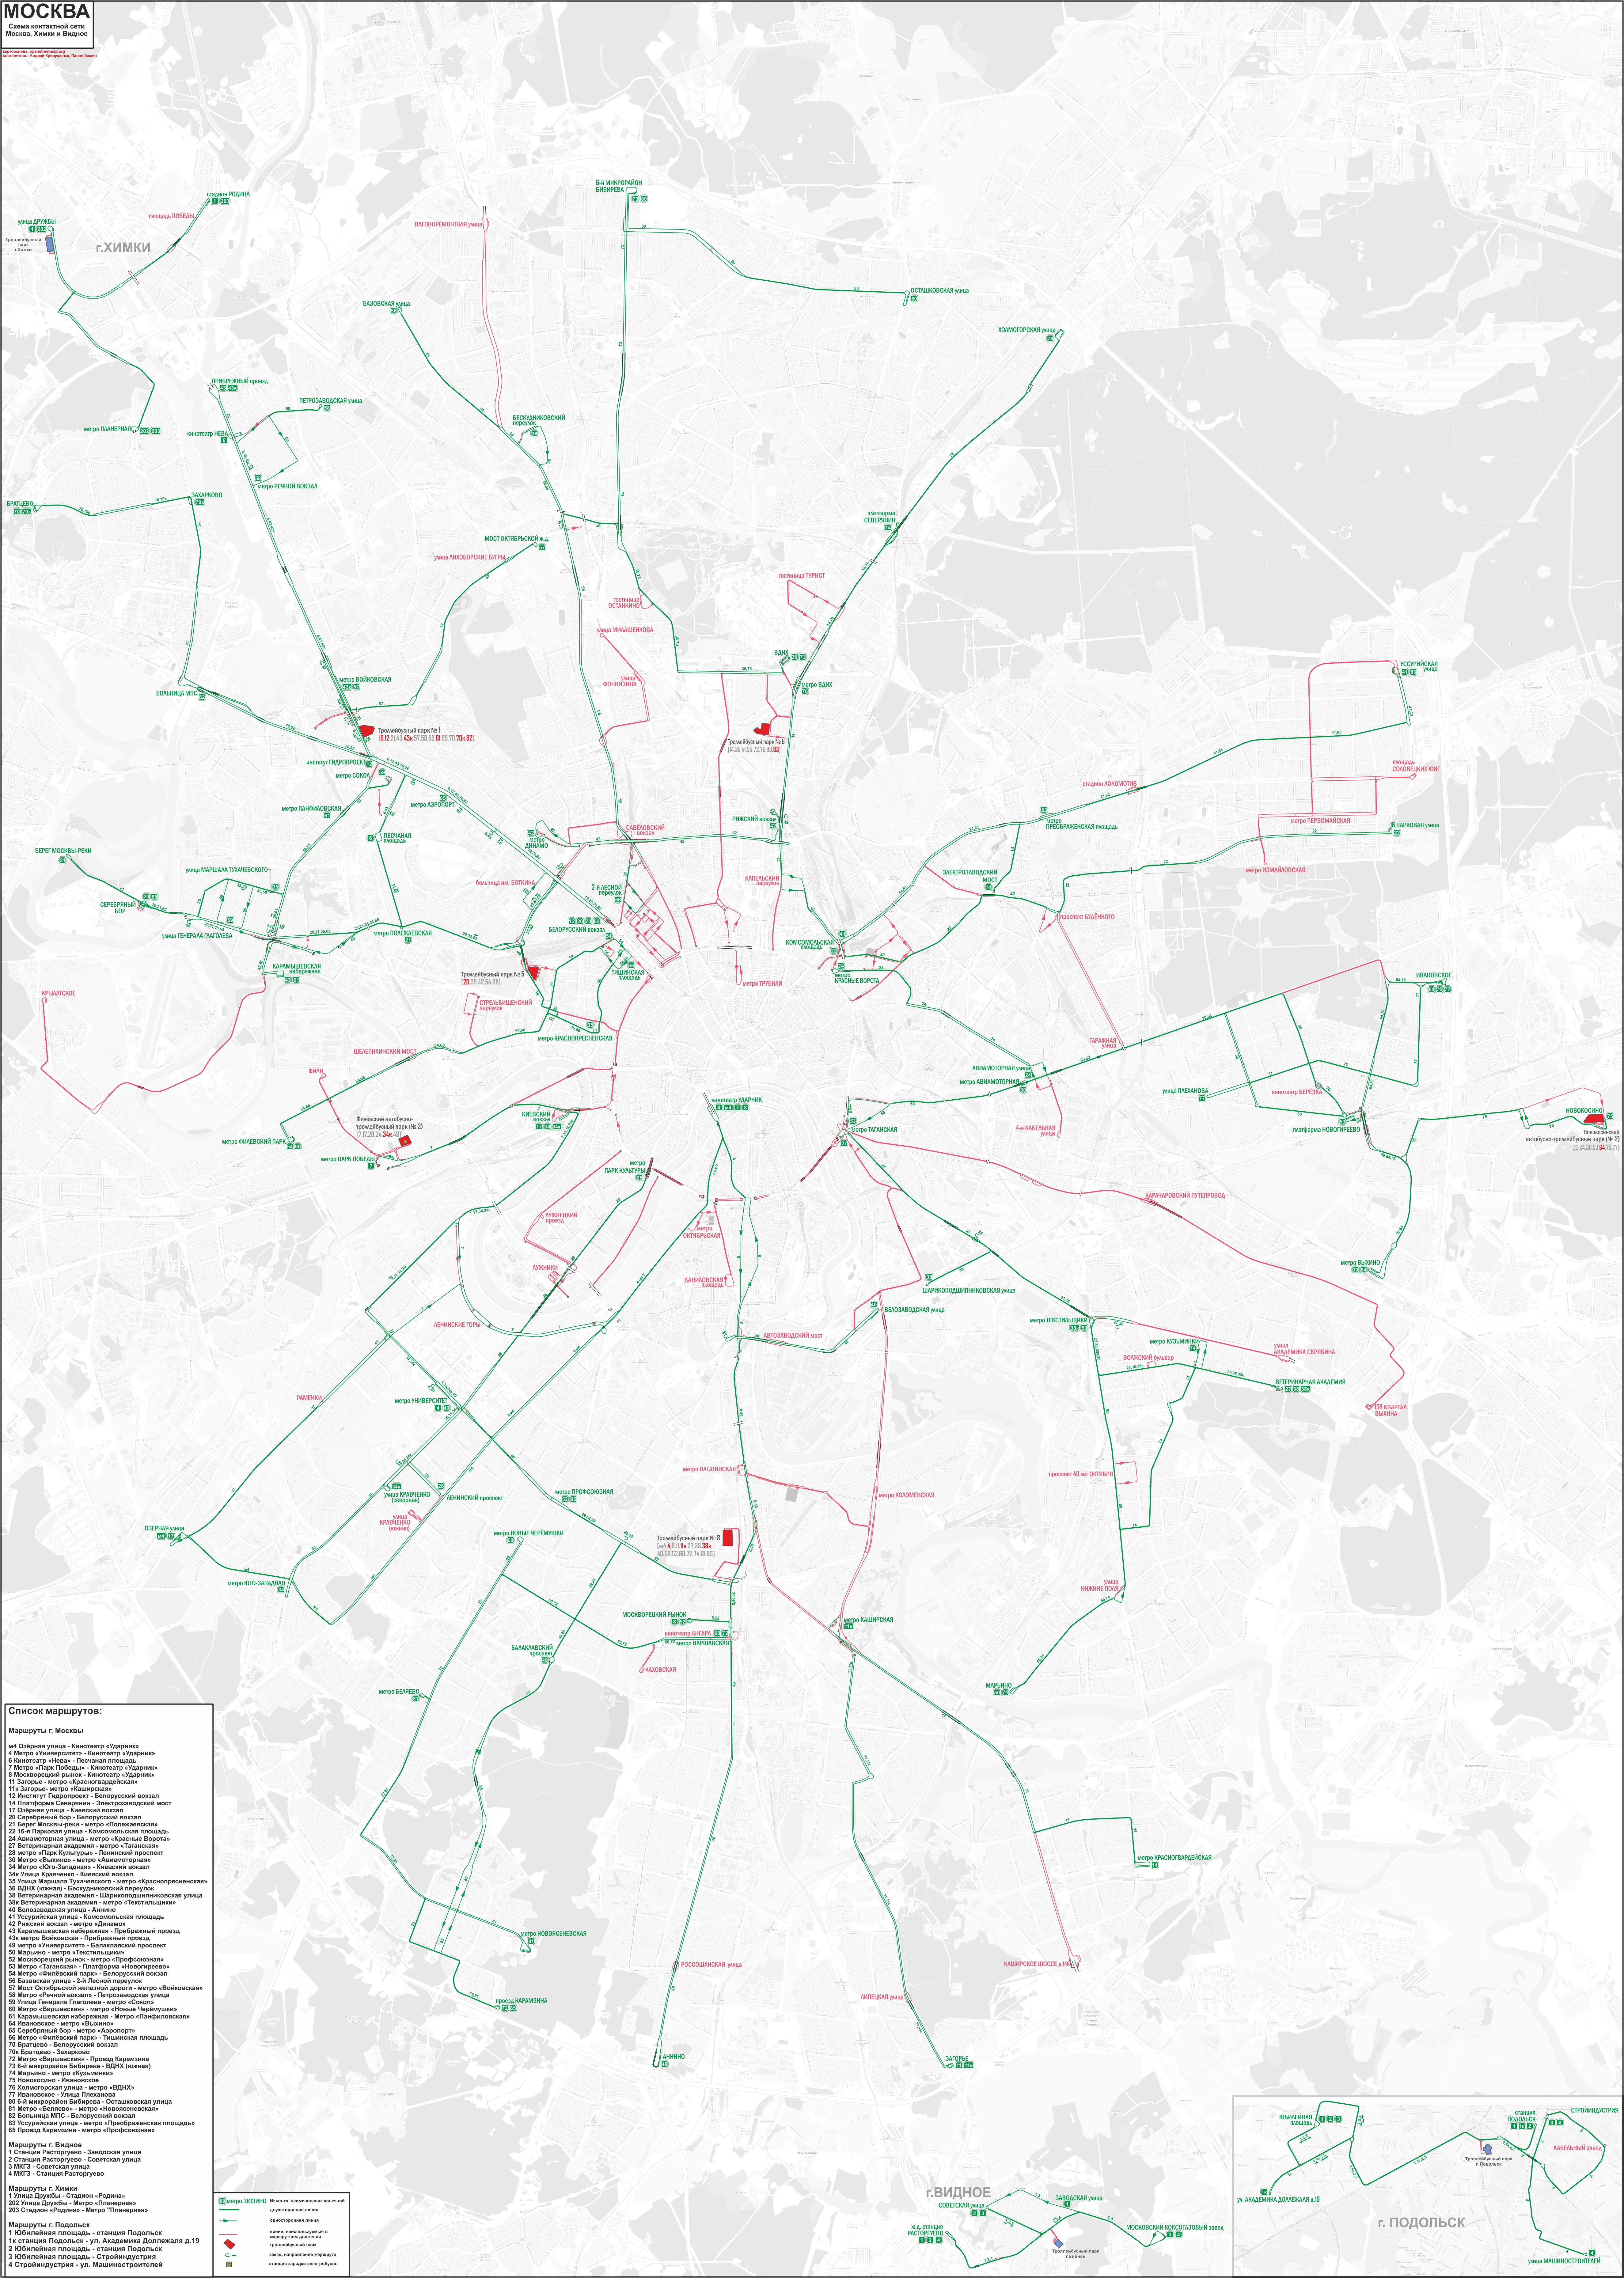 Moscow — Citywide Maps; Khimki — Maps; Vidnoye — Maps; პოდოლსკი — Maps; Moscow — Tramway and Trolleybus Infrastructure Maps